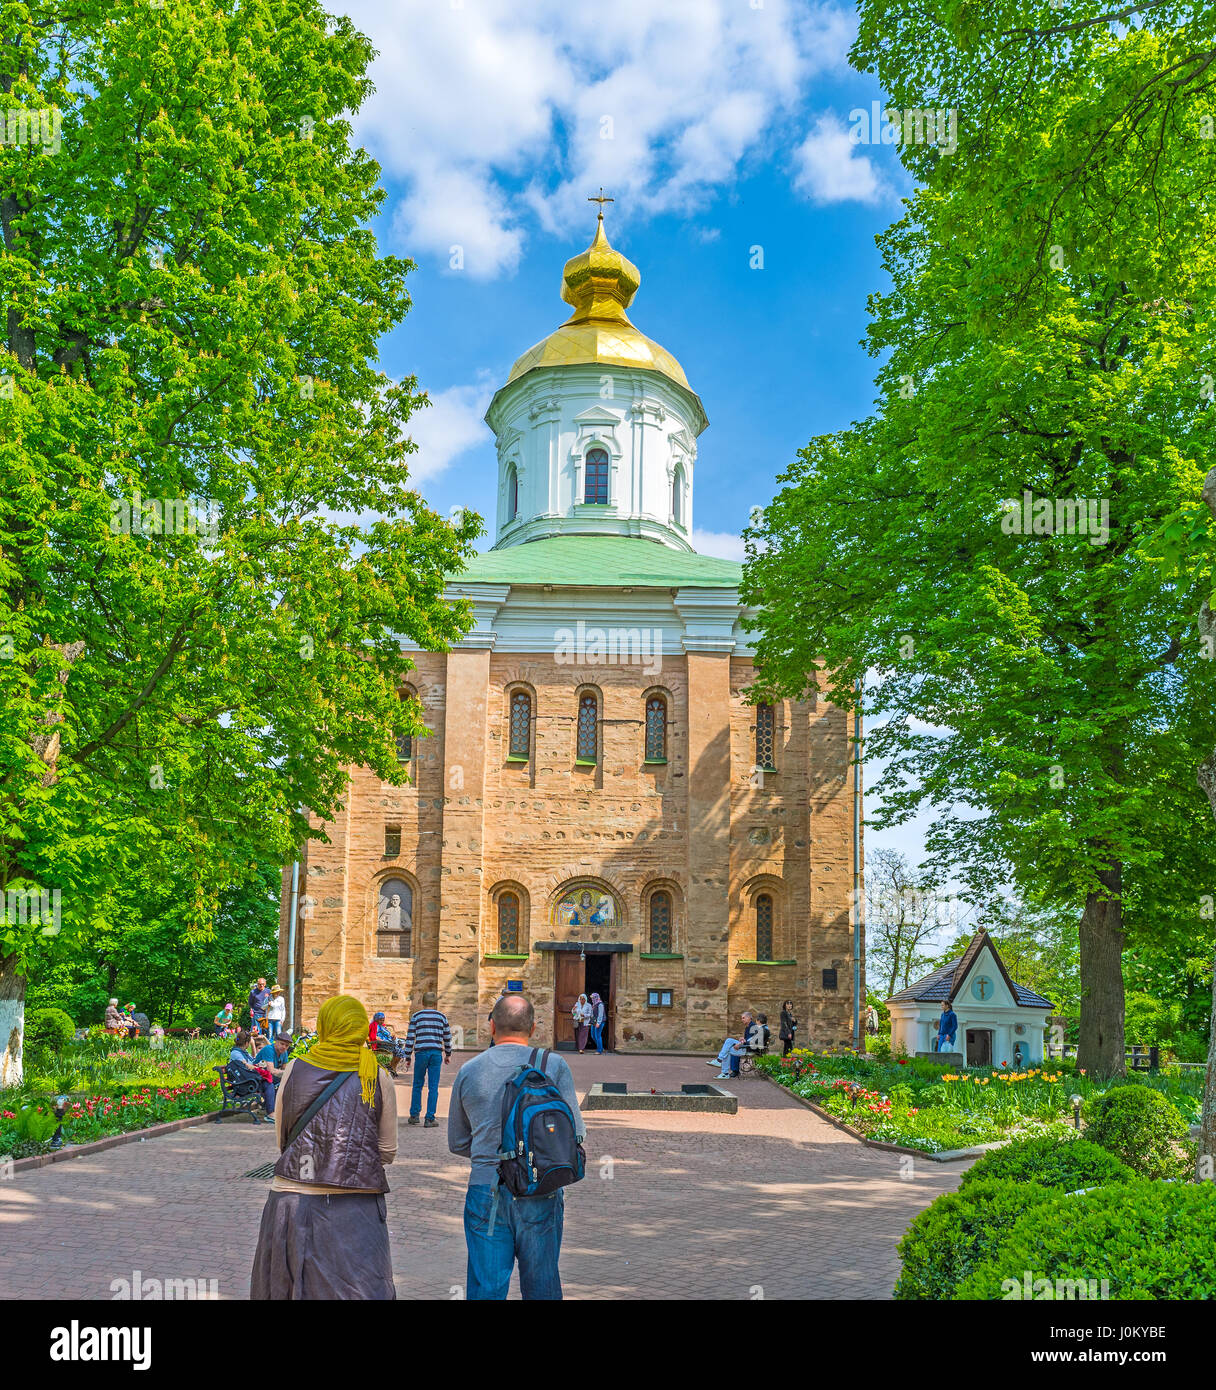 KIEV, UKRAINE - MAY 2, 2016: Saint Michael Church is the oldest building in Vydubychi Monastery ensemble with medieval walls from Kievan Rus period, o Stock Photo